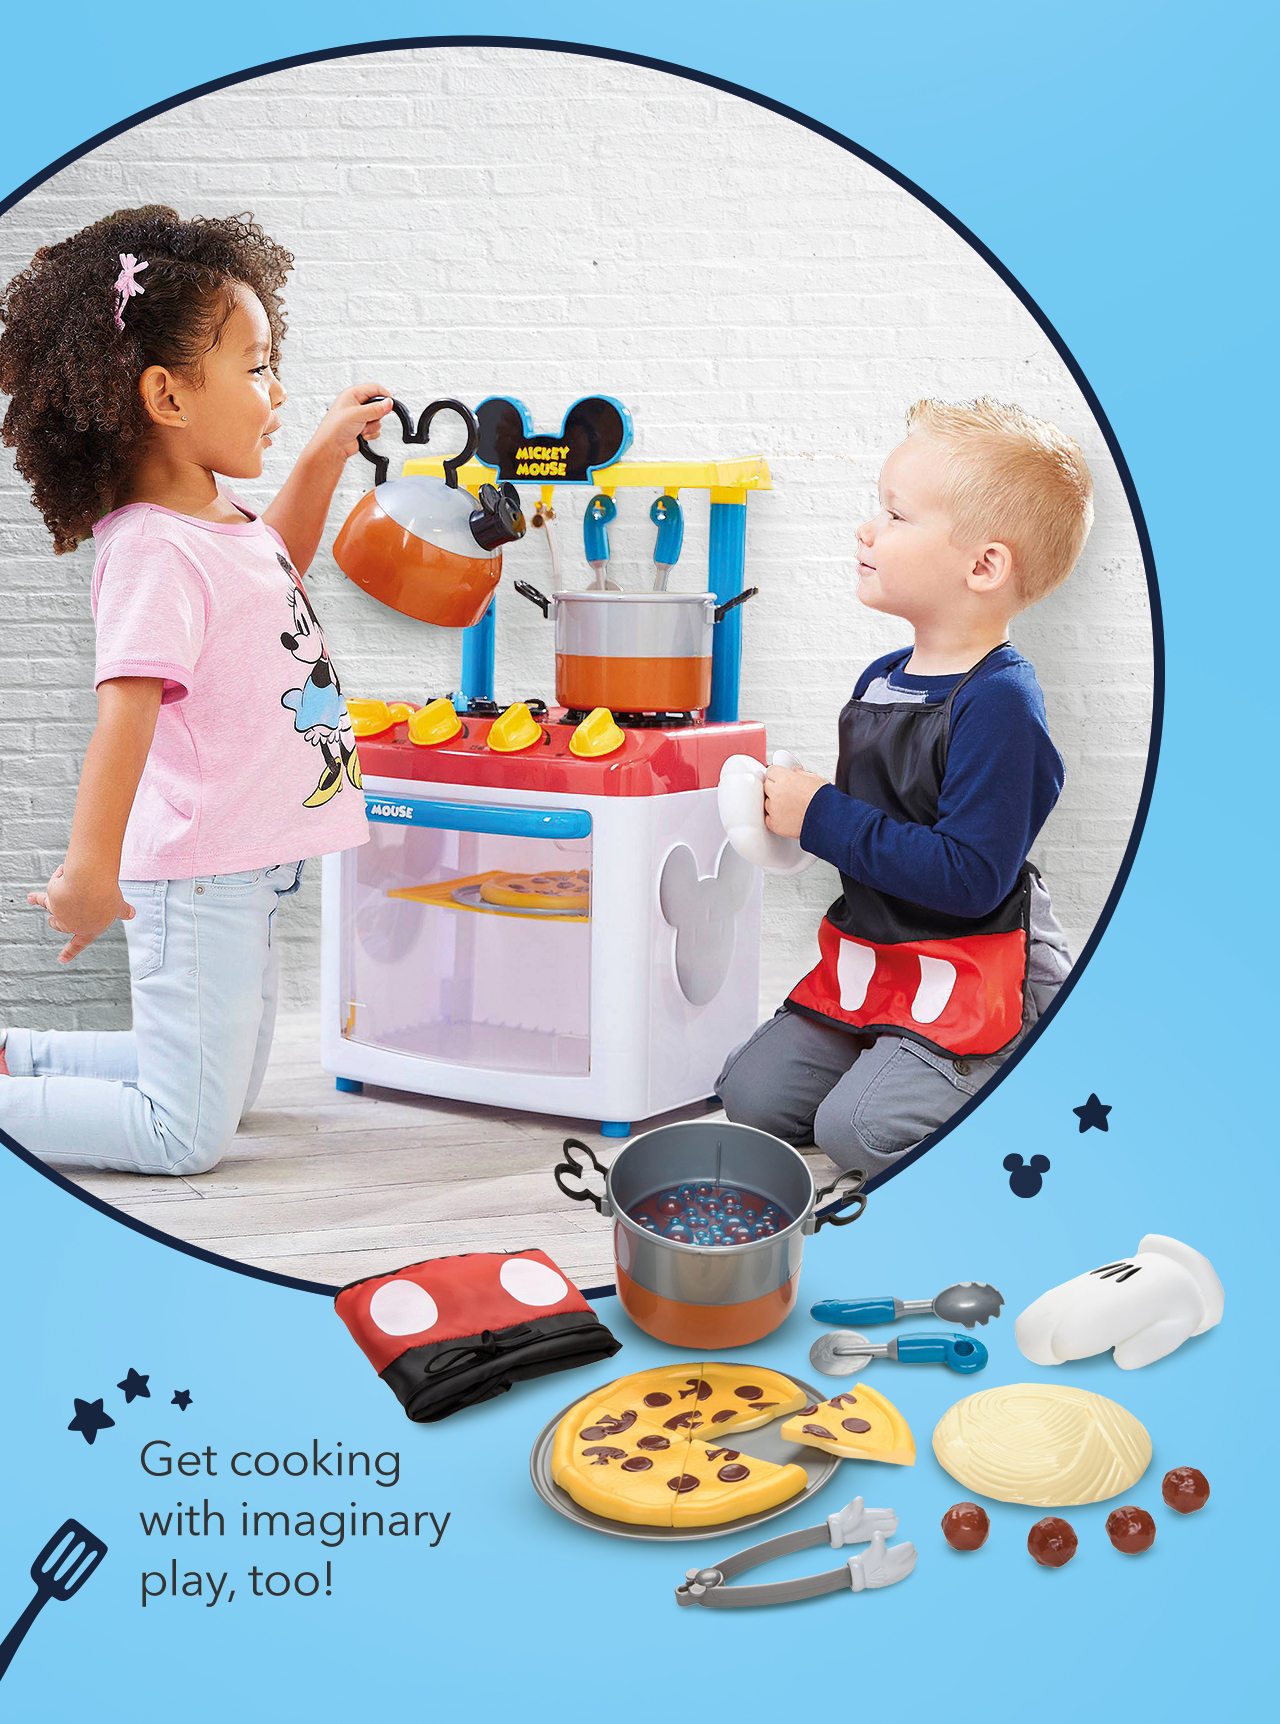 Get cooking with imaginary play, too! | SHOP TOYS